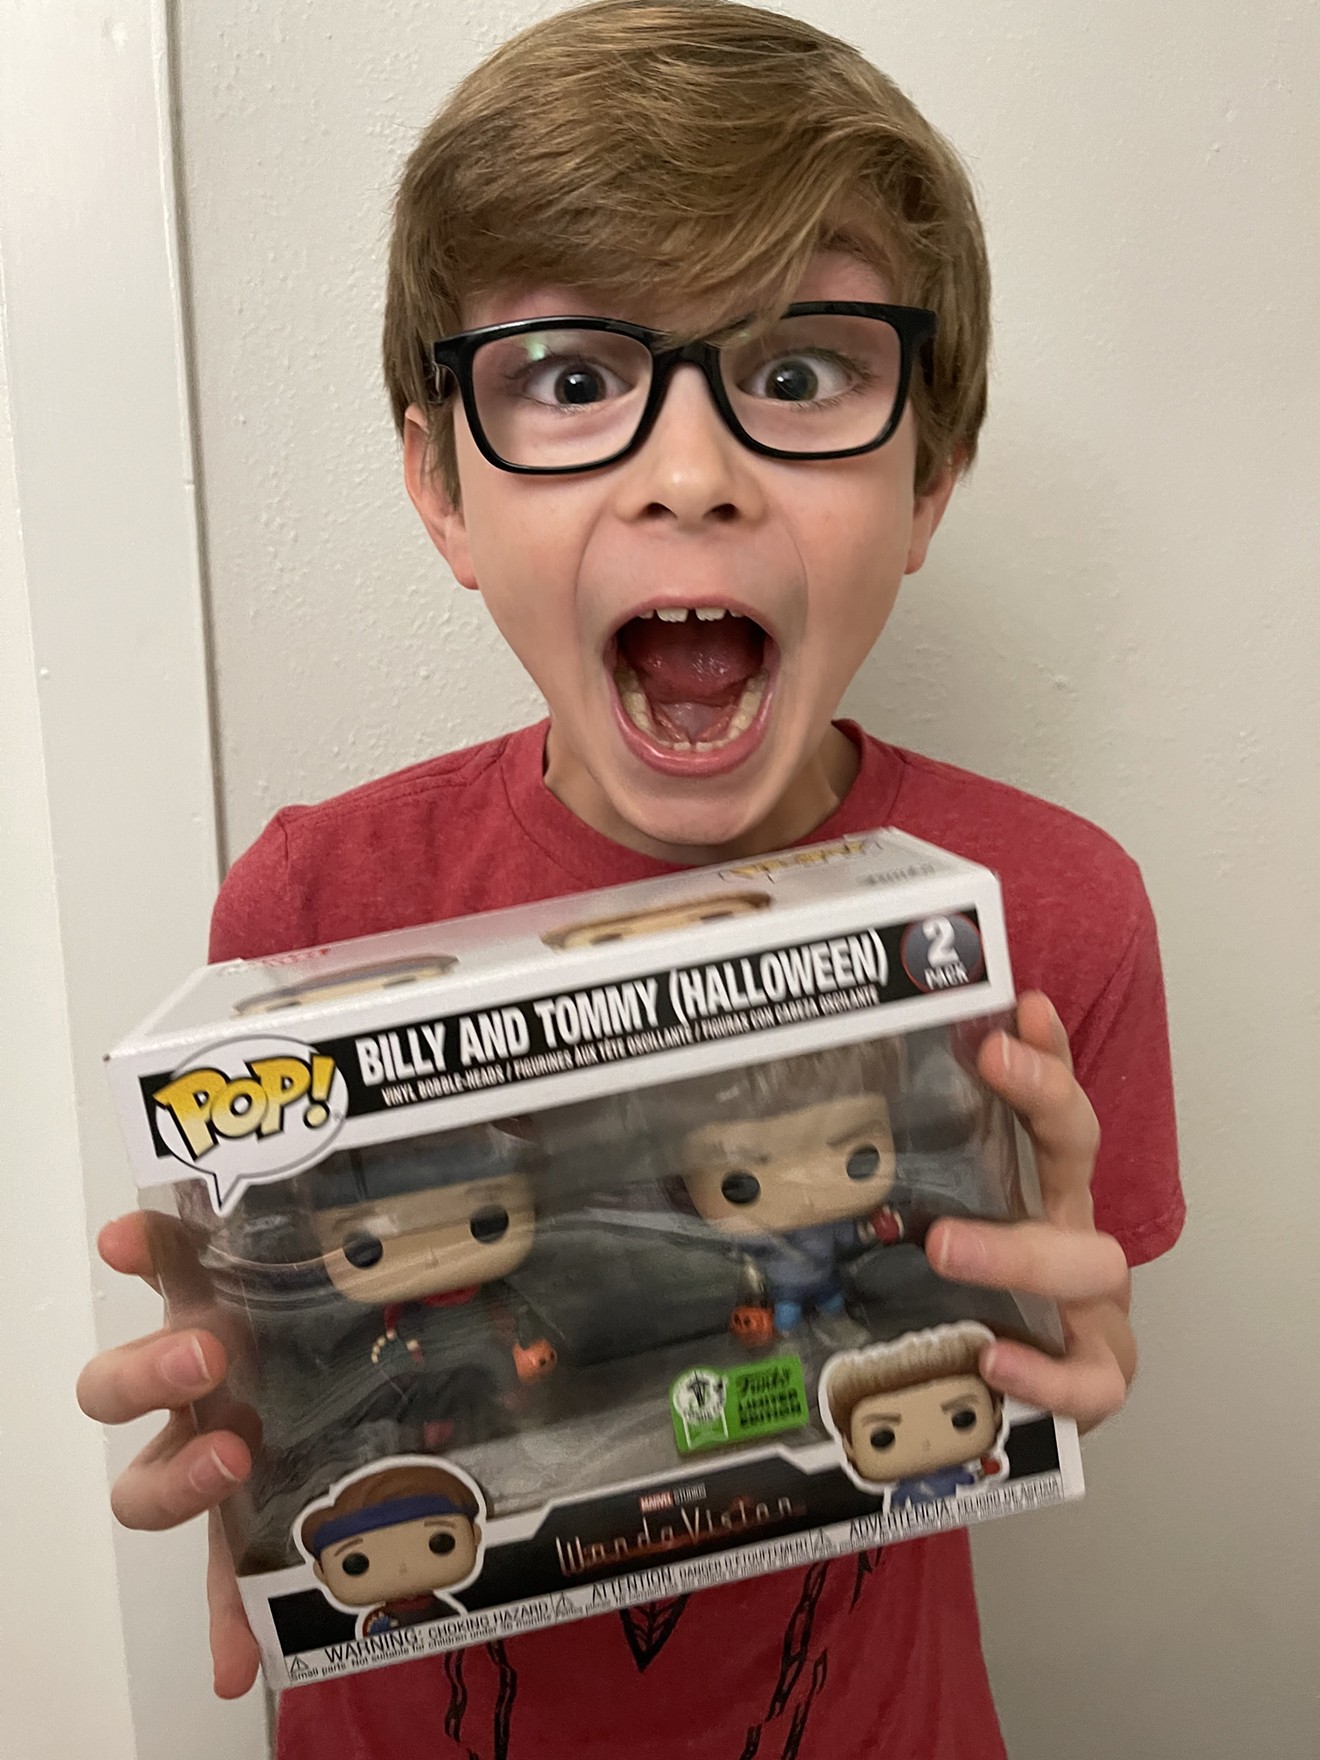 Actor Julian Hilliard shows off the Funko Pop! doll based on his character Billy Maximoff on the Emmy nominated Disney+ series WandaVision.